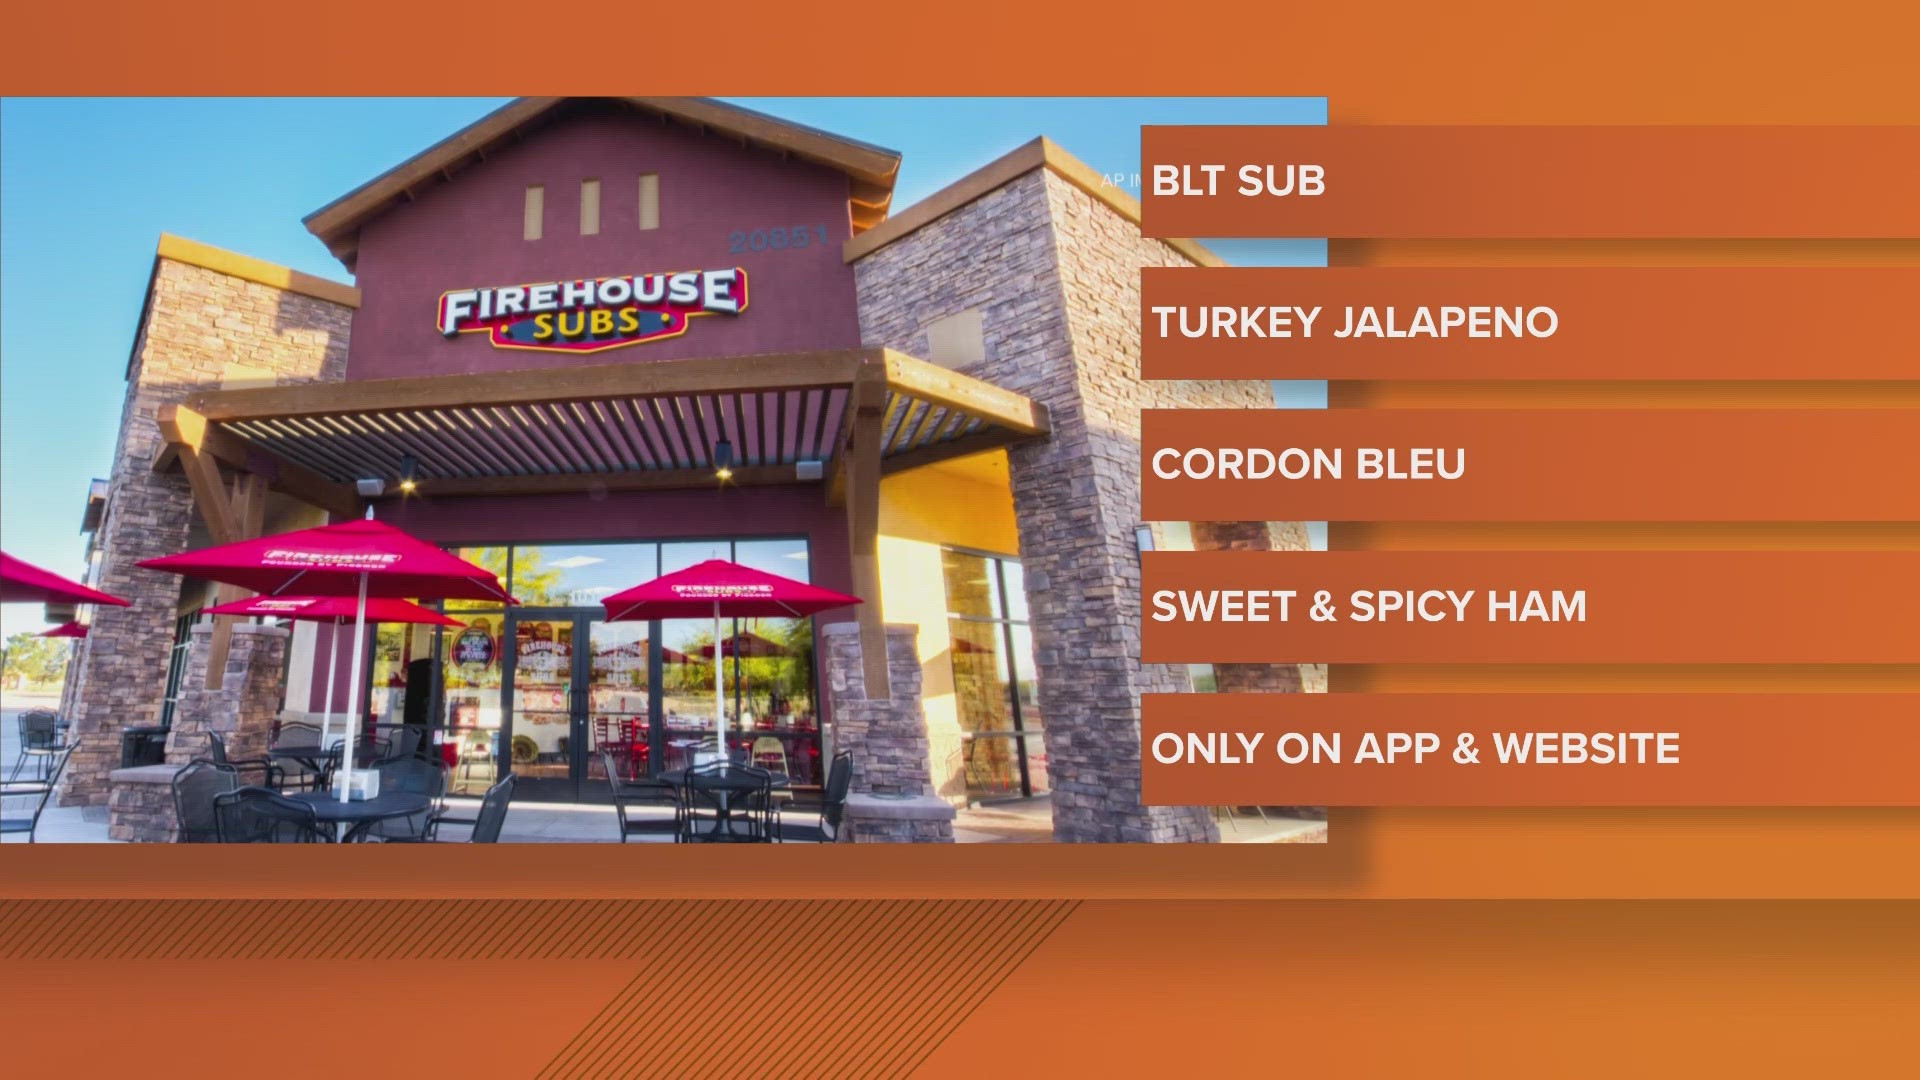 The new sandwiches can only be bought through the Firehouse Subs app or through its website.